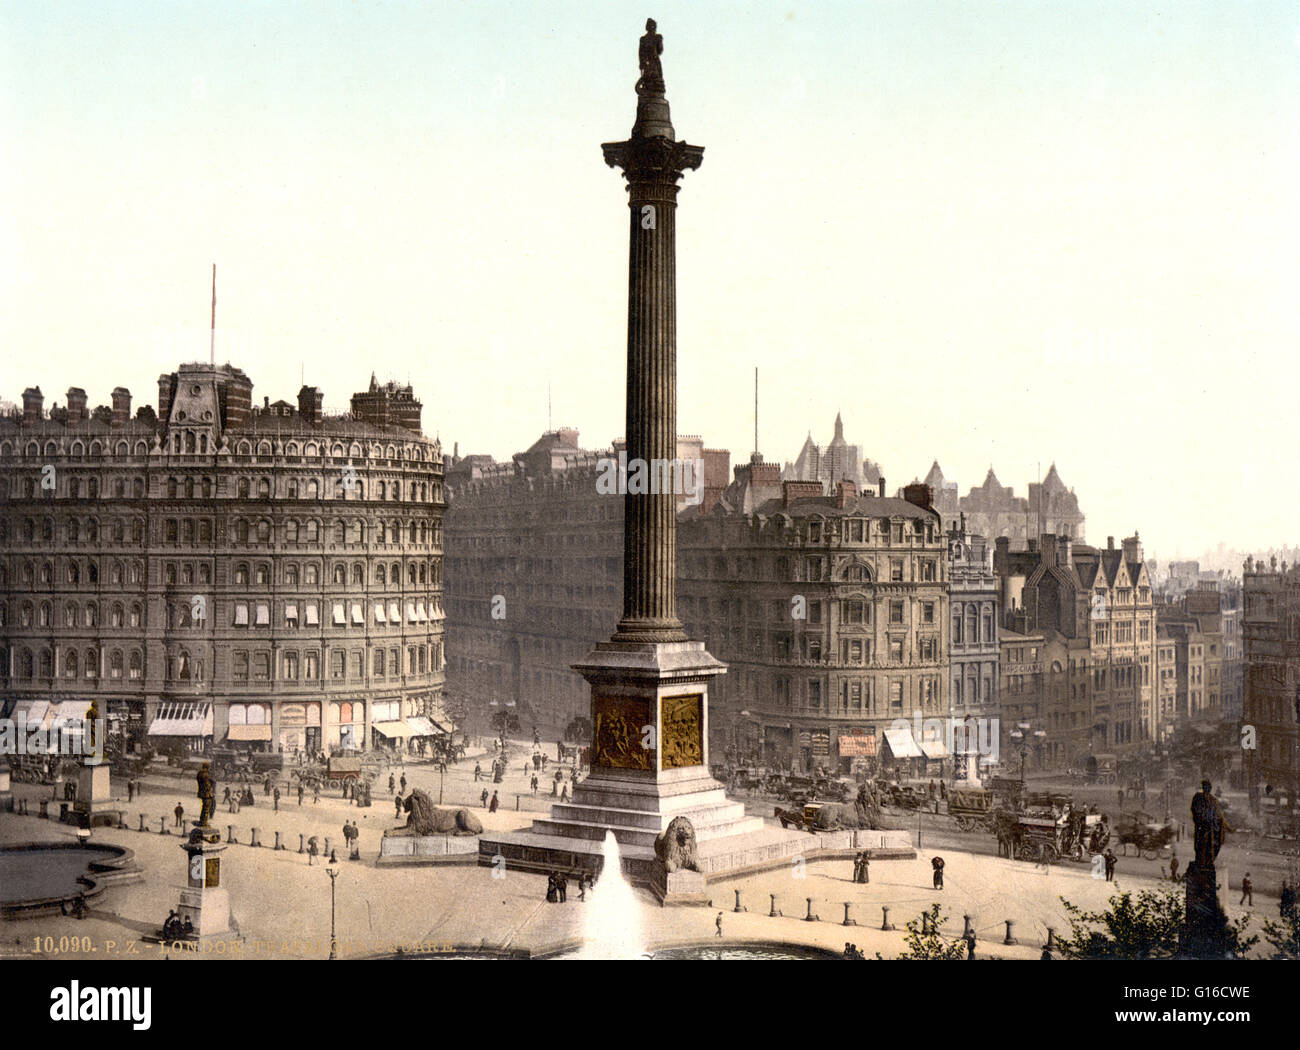 Trafalgar Square, from National Gallery, London, England. Trafalgar Square is a public space and tourist attraction in central London, built around the area formerly known as Charing Cross. It is situated in the City of Westminster. At its center is Nelso Stock Photo